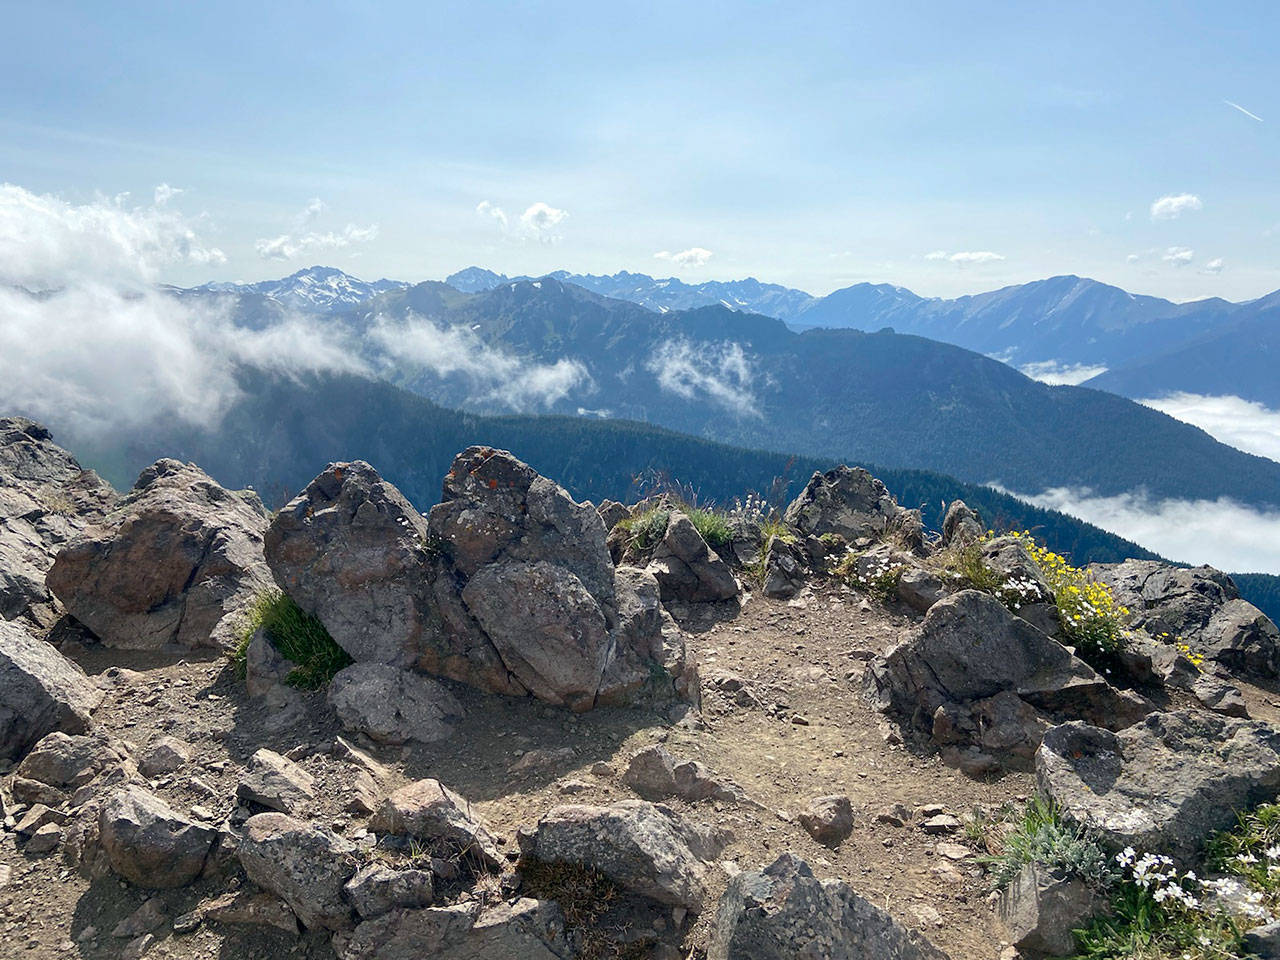 The Olympic Mountains as seen from the summit of Mount Townsend. Photo by Rob Ollikainen/Olympic Peninsula News Group